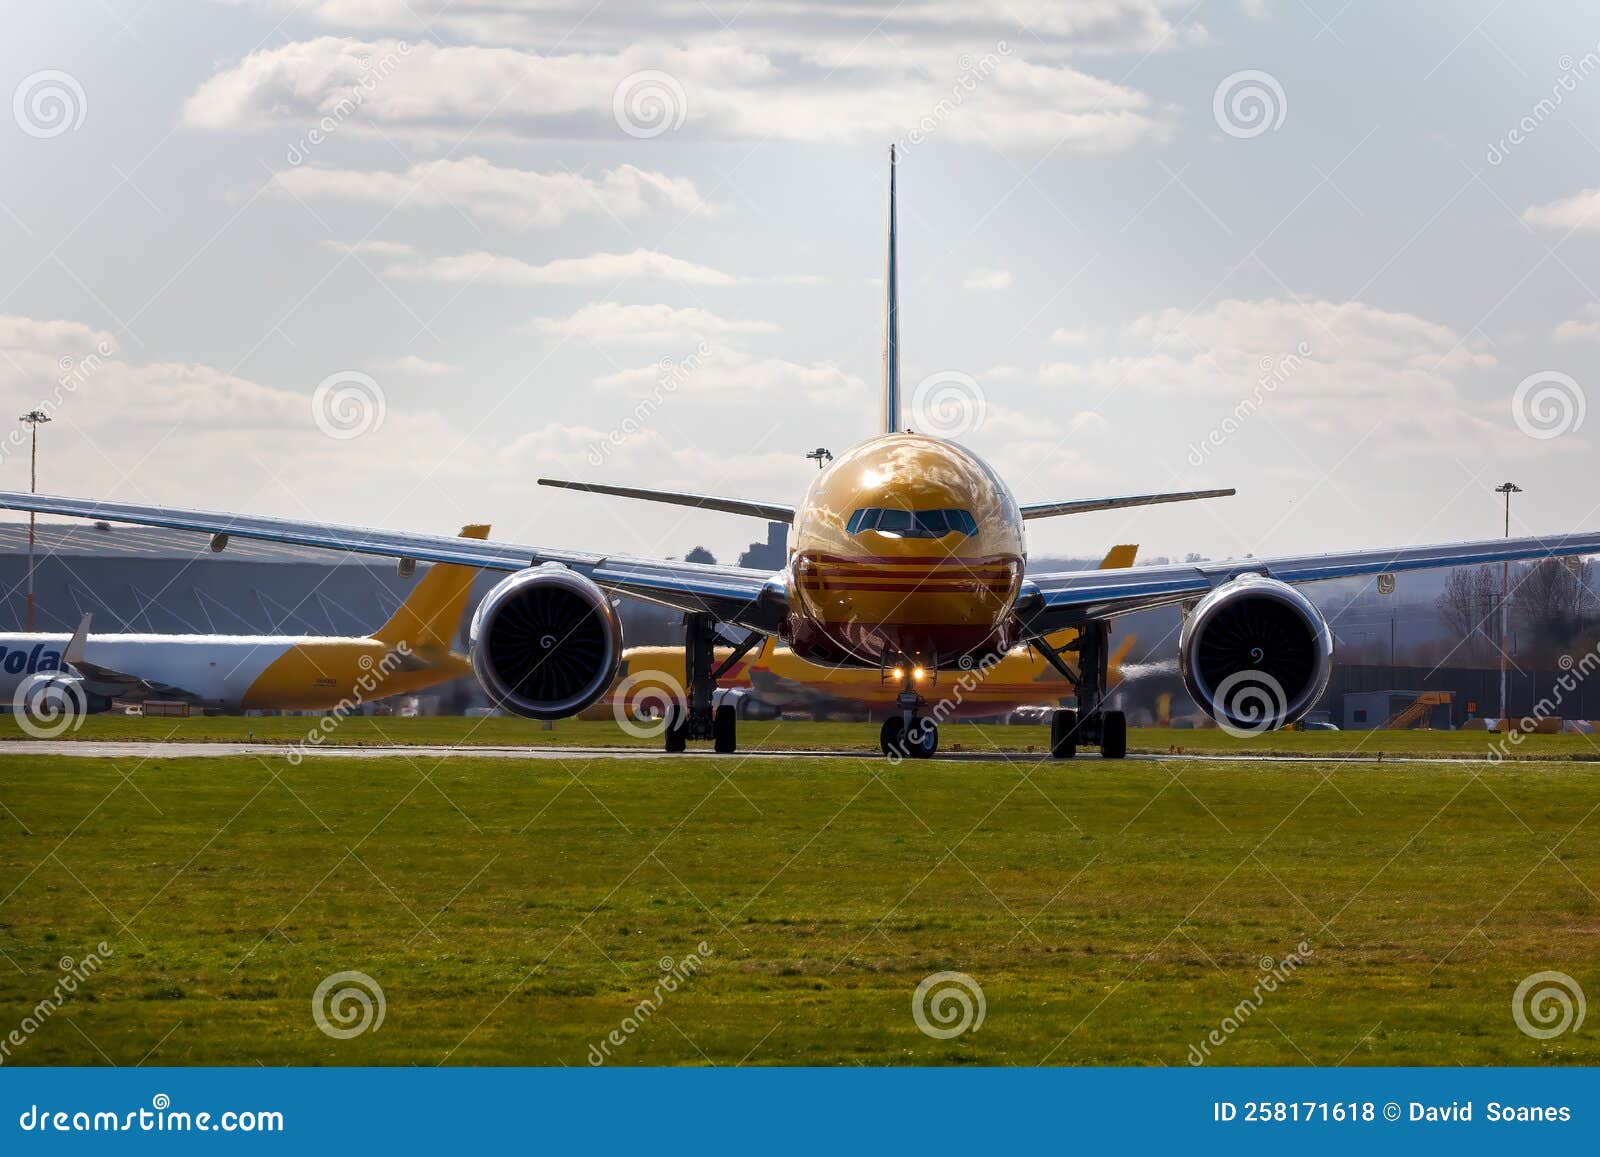 g-dhly a 777 taxing out for take off at ema - stock photo.jpg